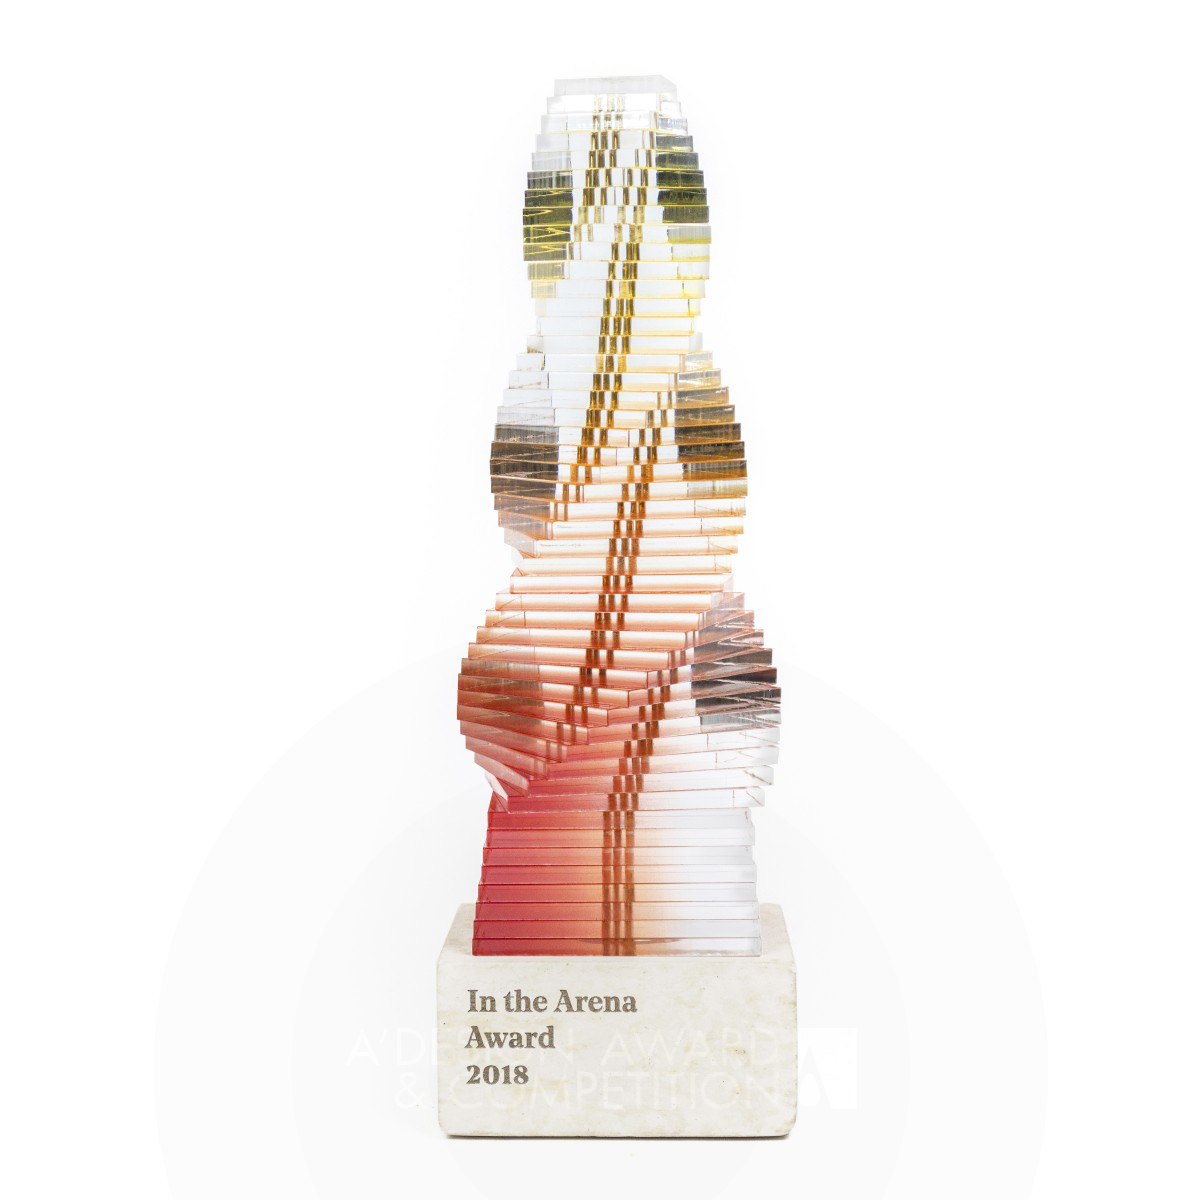 In the Arena Award Award Design by wkrm design Silver Awards, Prize and Competitions Design Award Winner 2019 